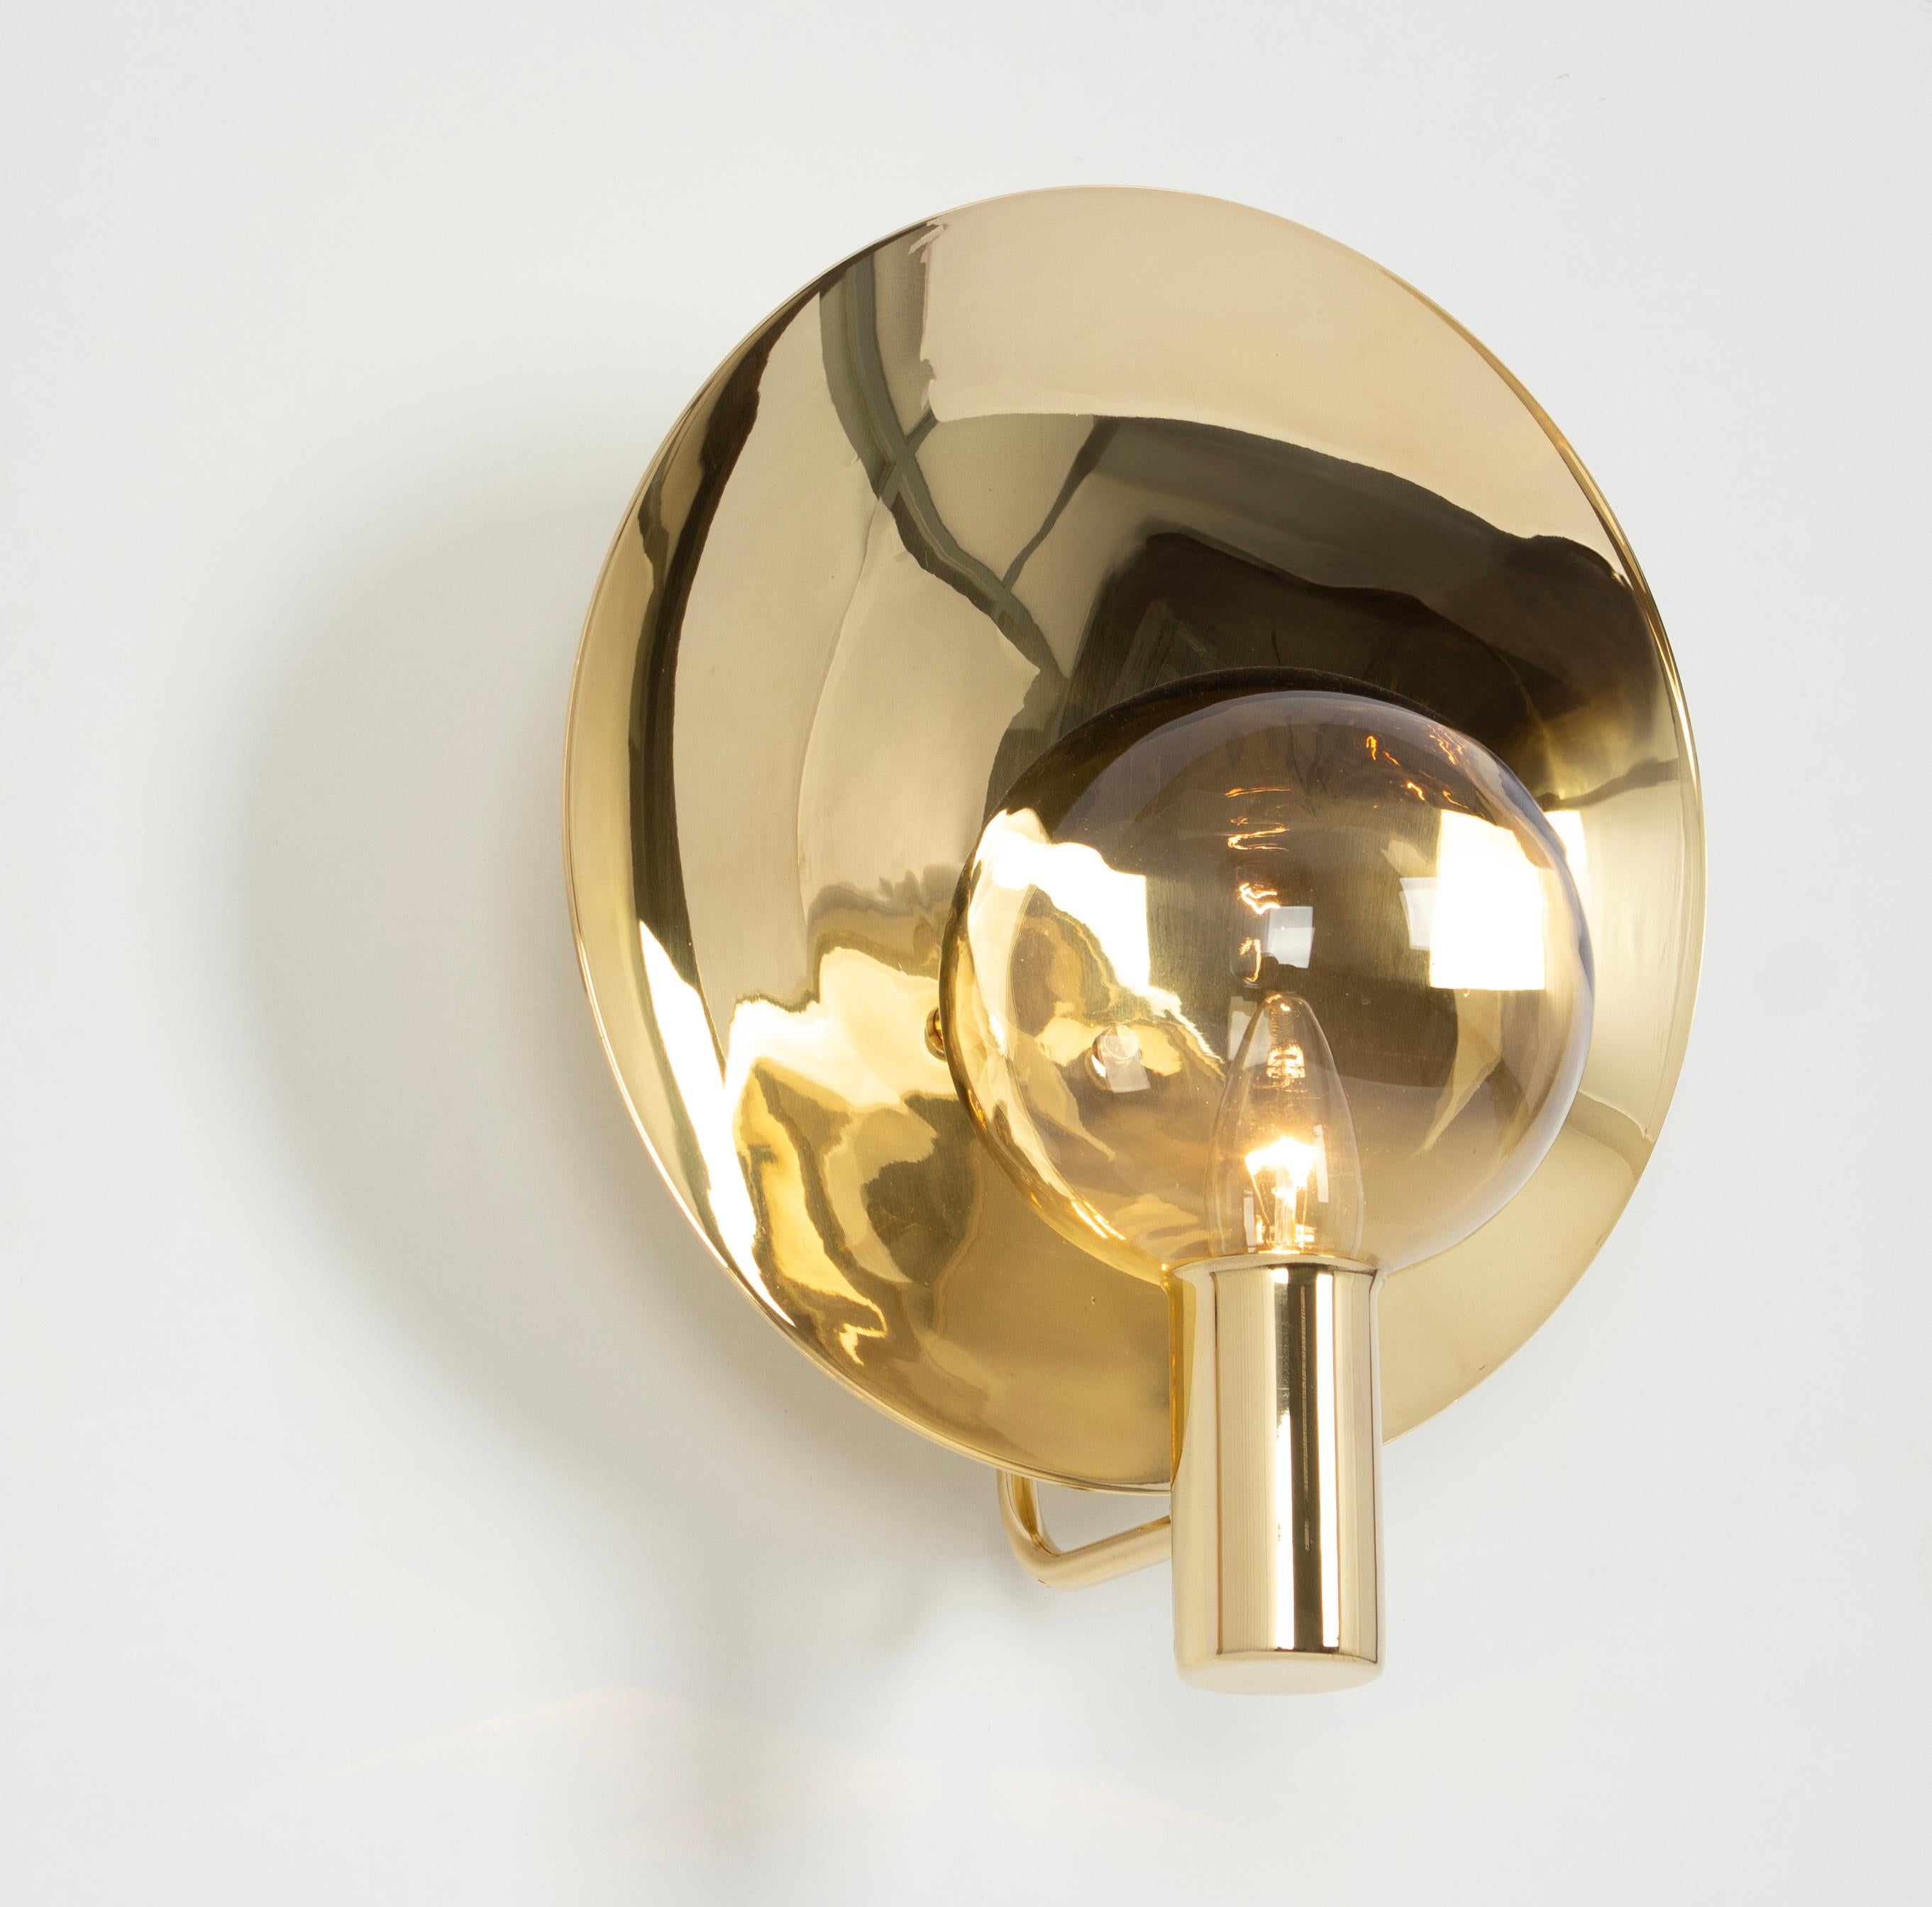 Italian Stunning Large Brass and Smoke Glass Sconce, Hans Agne jakobsson, Sweden, 1970s For Sale